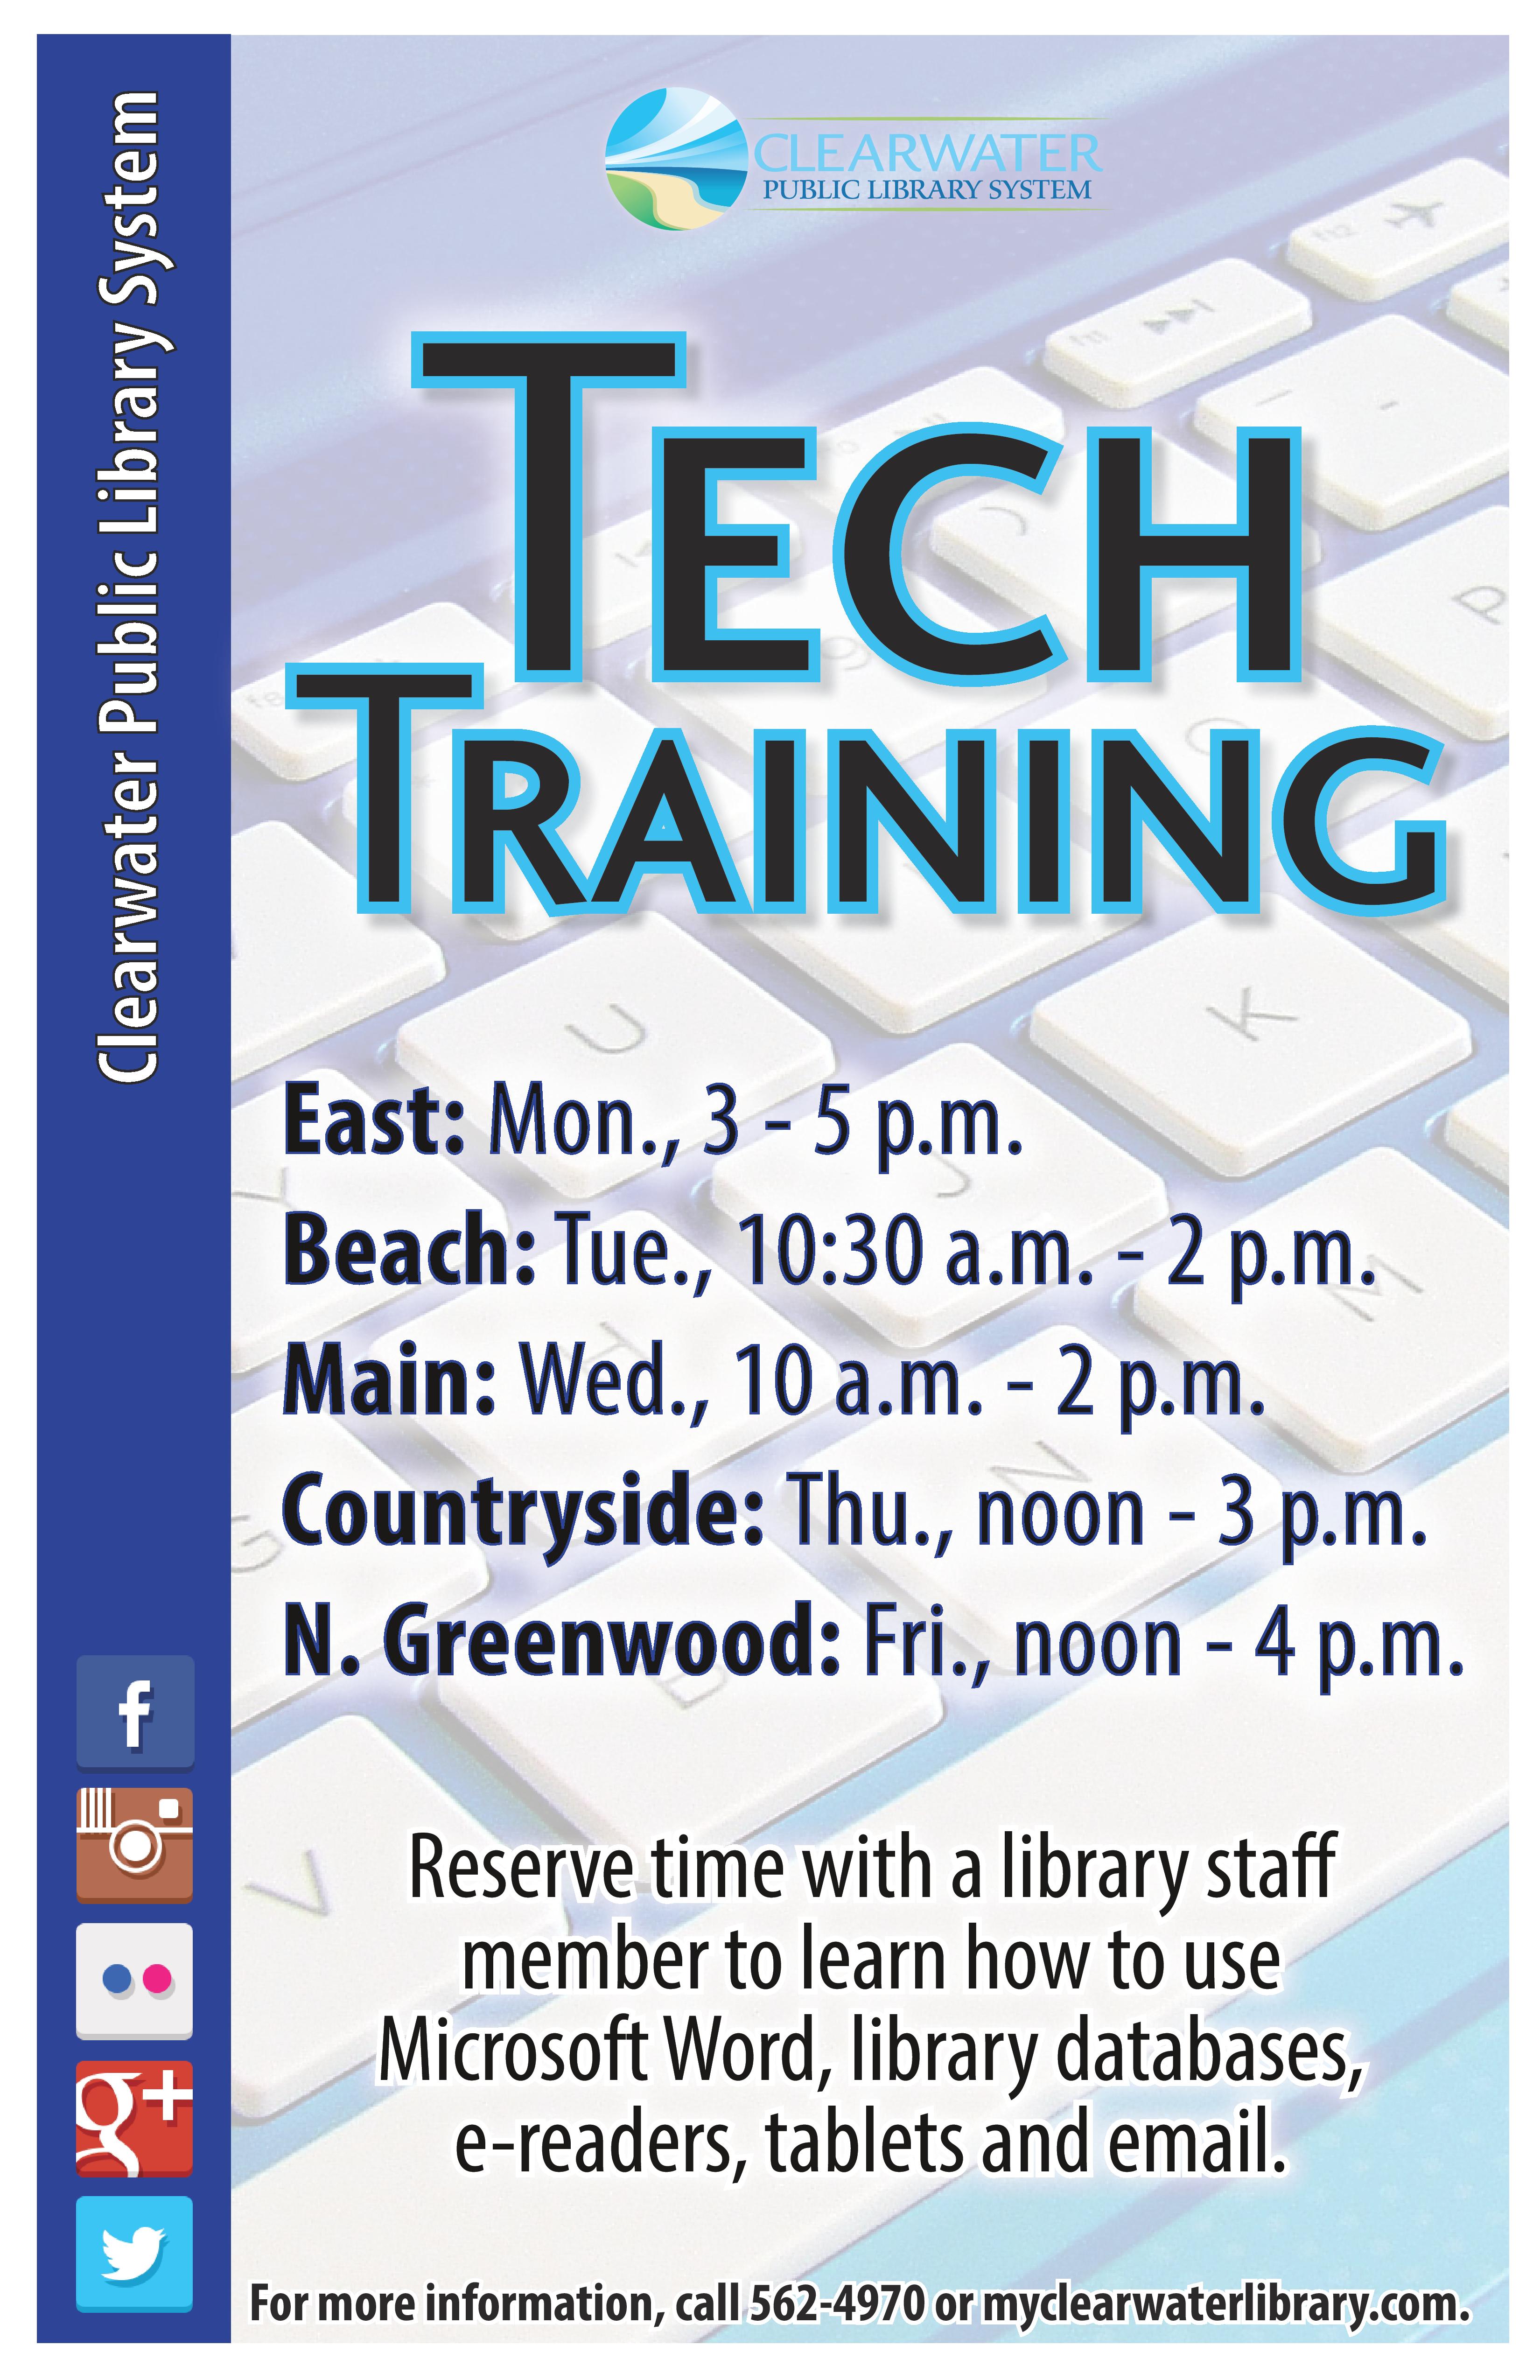 Learn how to use Microsoft Word, library databases, e-readers, tablets and email.